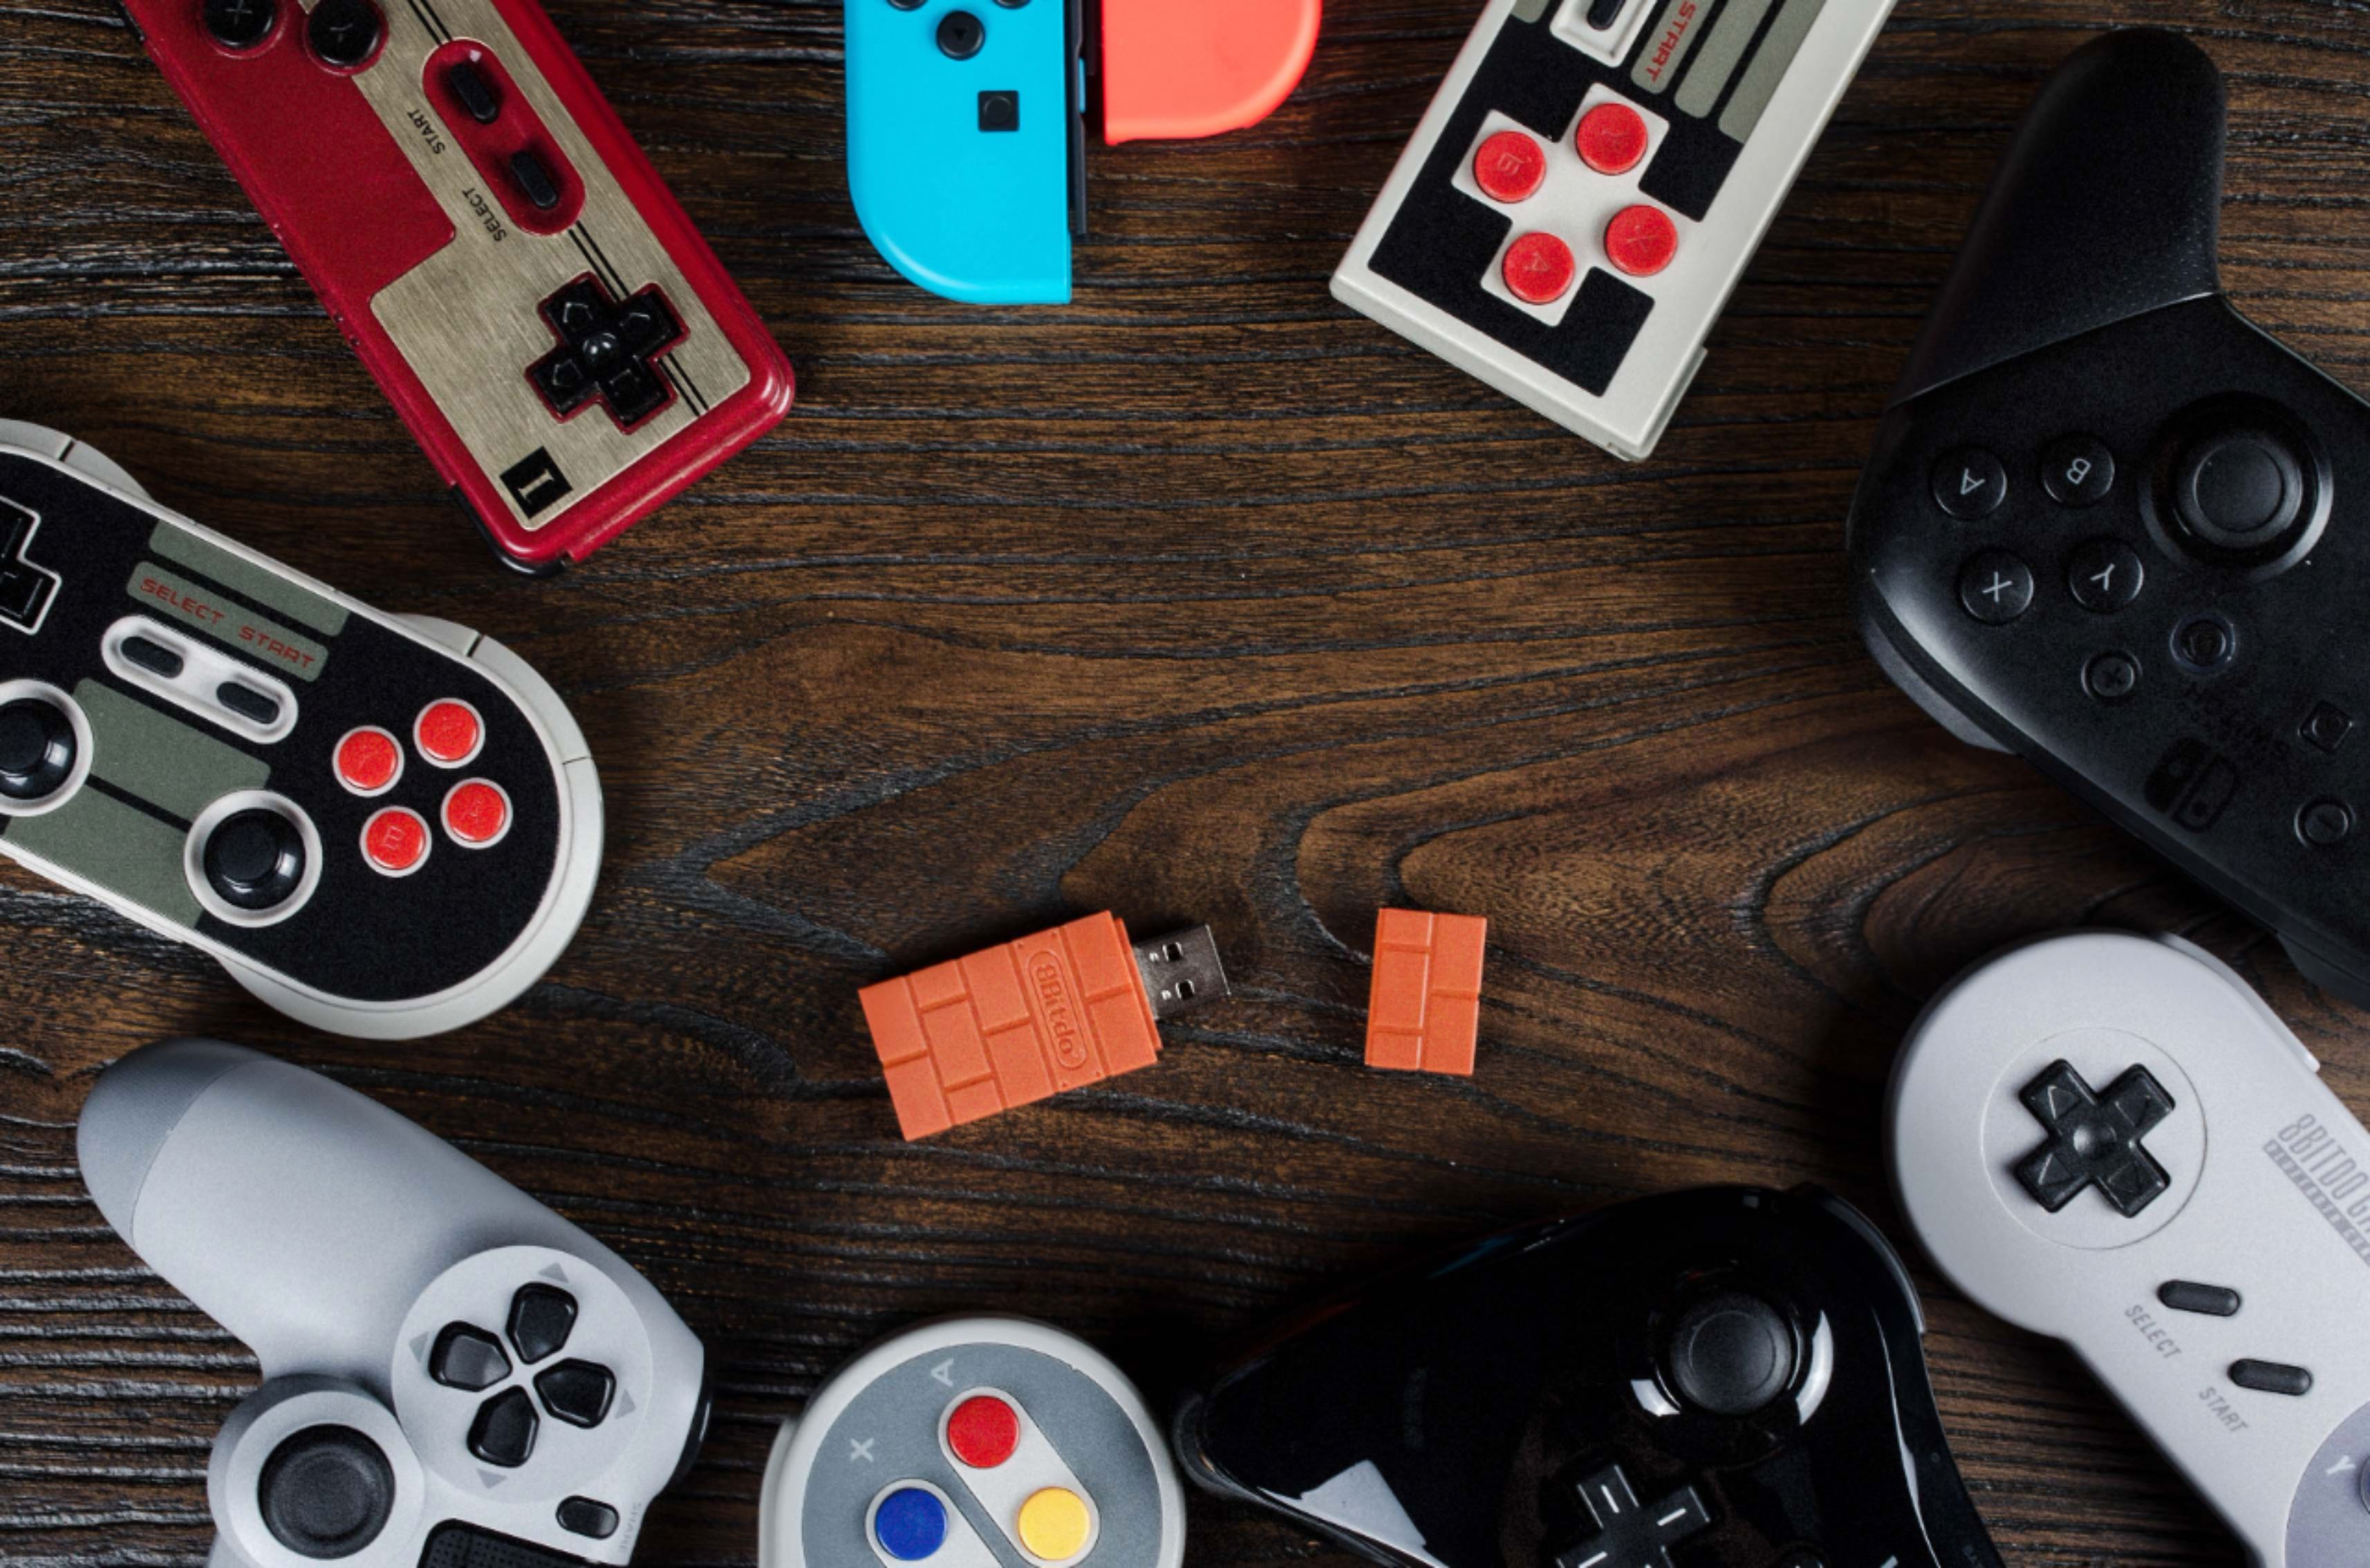 8bitdo Wireless Usb Adapter For Most Gaming Controllers Brick Red da Best Buy